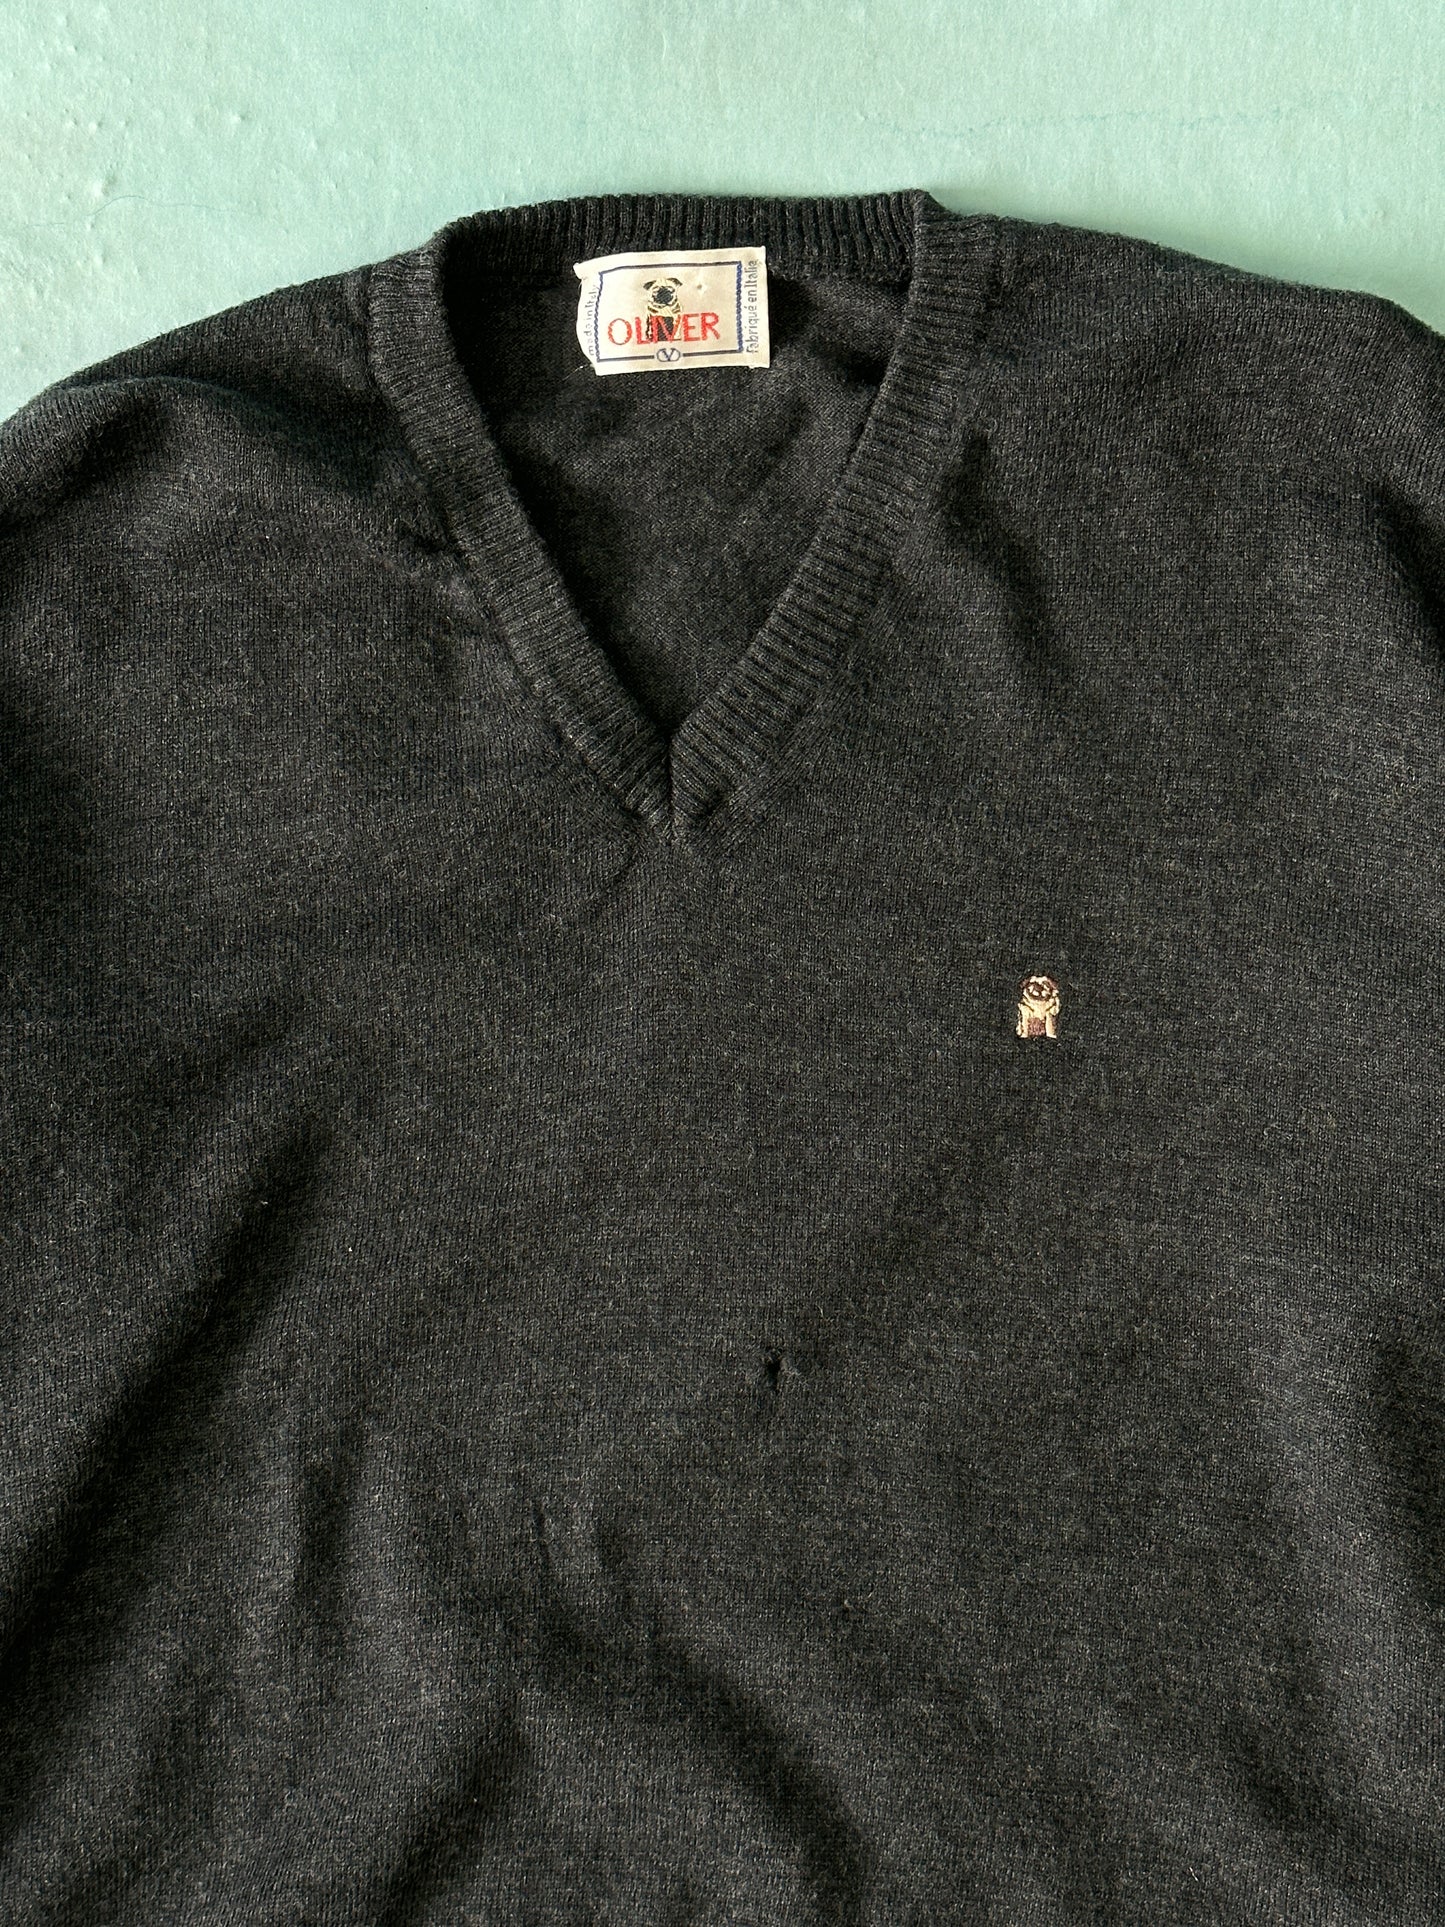 80's Oliver by Valentino Wool Sweater - M